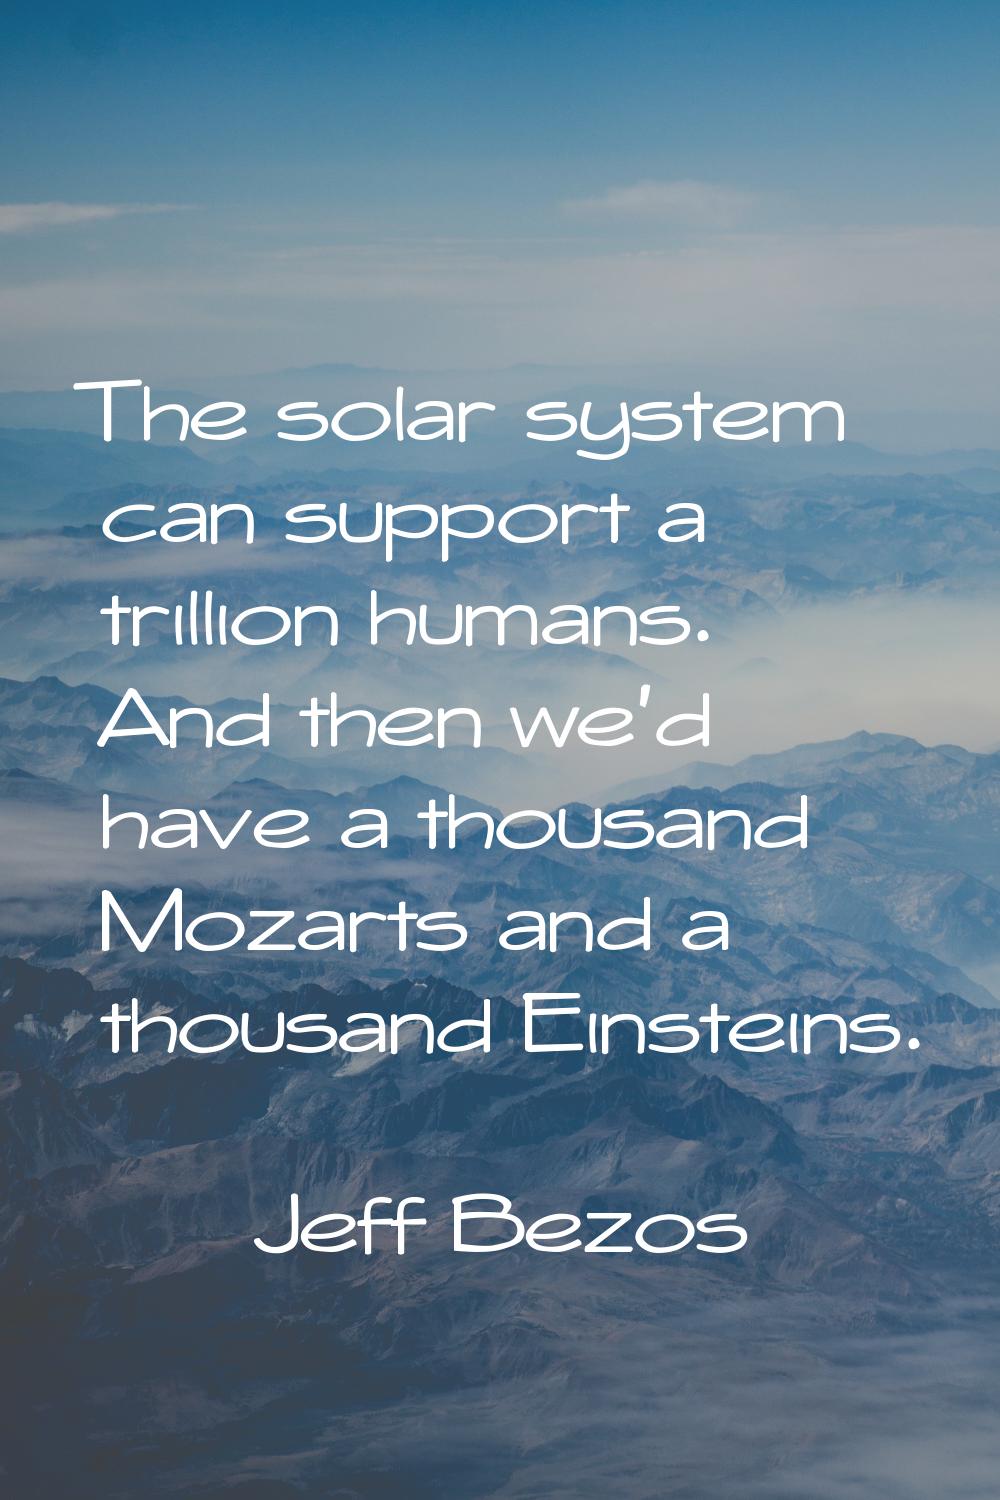 The solar system can support a trillion humans. And then we'd have a thousand Mozarts and a thousan